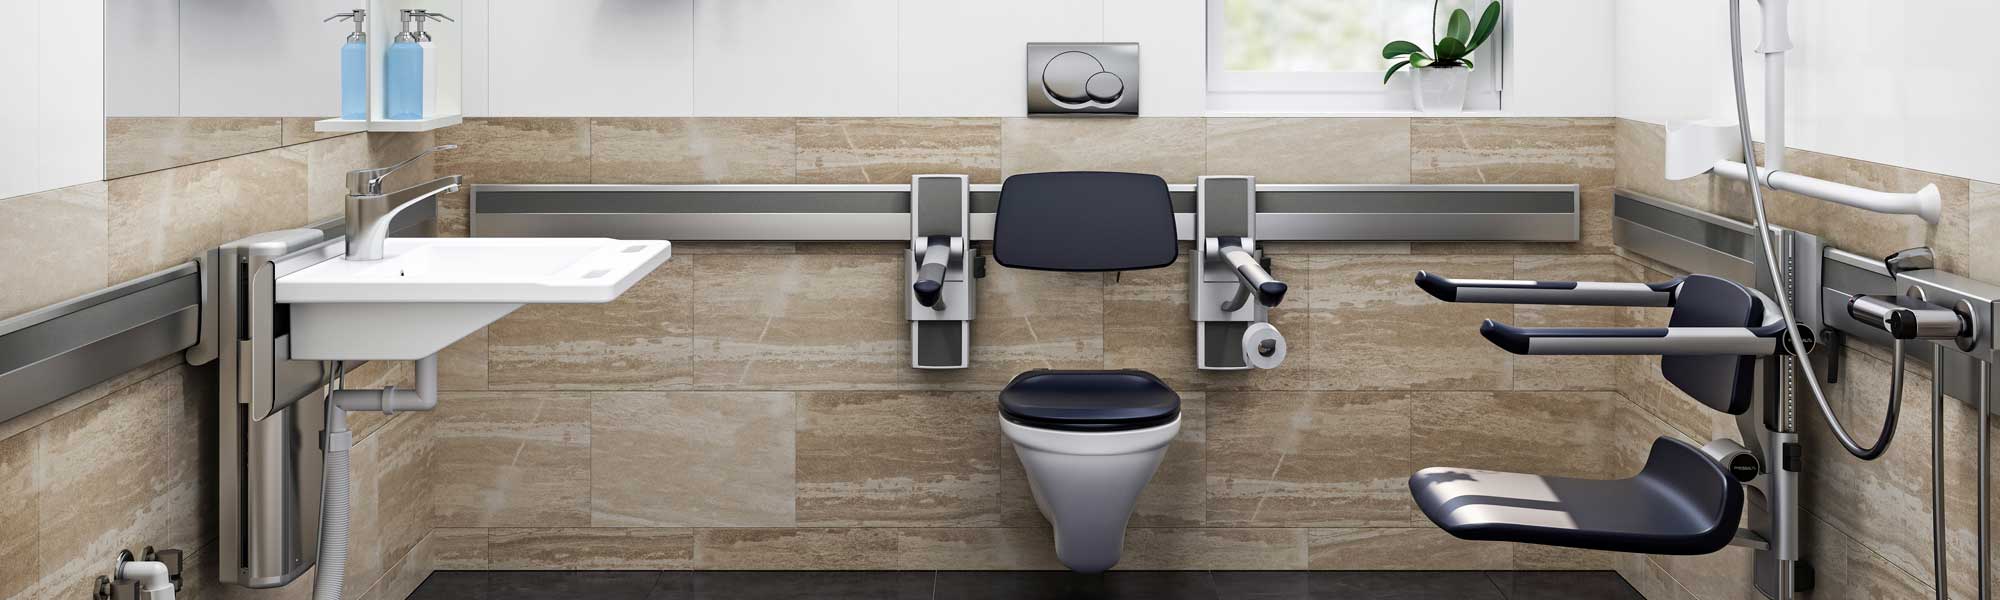 Pressalit Accessible Toilets, Sinks and Shower Facilities